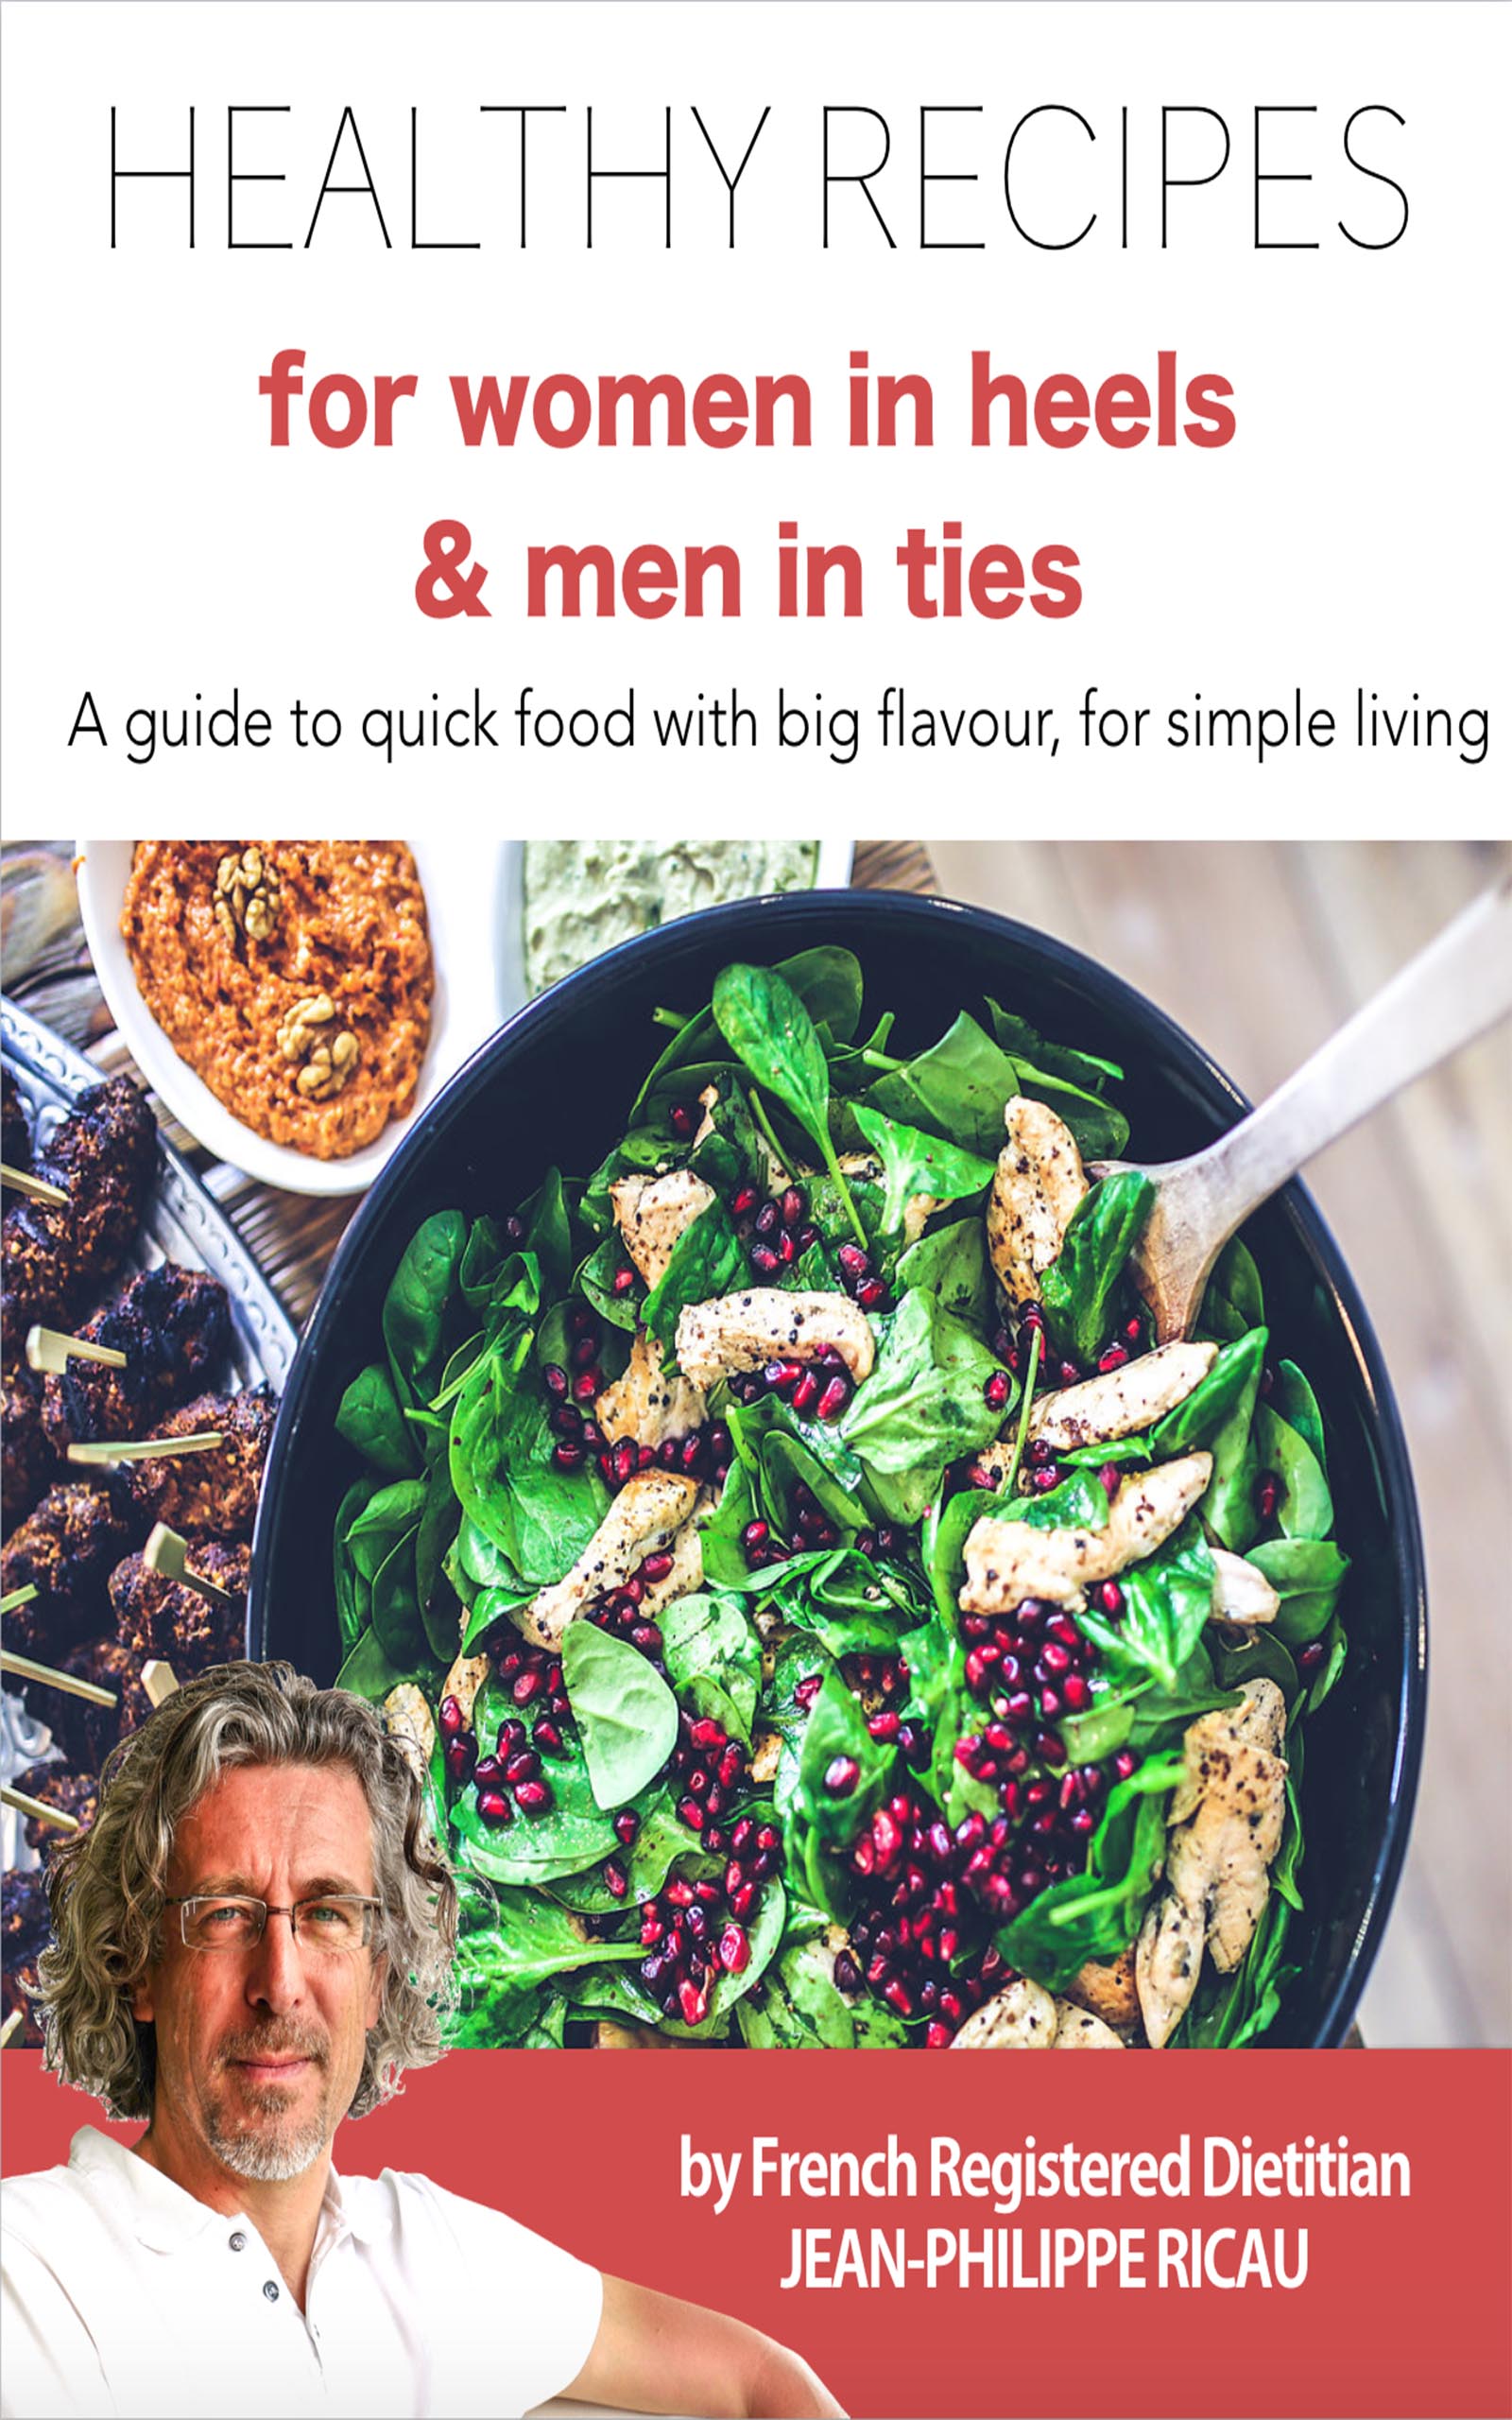 FREE: Healthy Recipes For Women In Heels And Men in Ties by Jean-Philippe Ricau